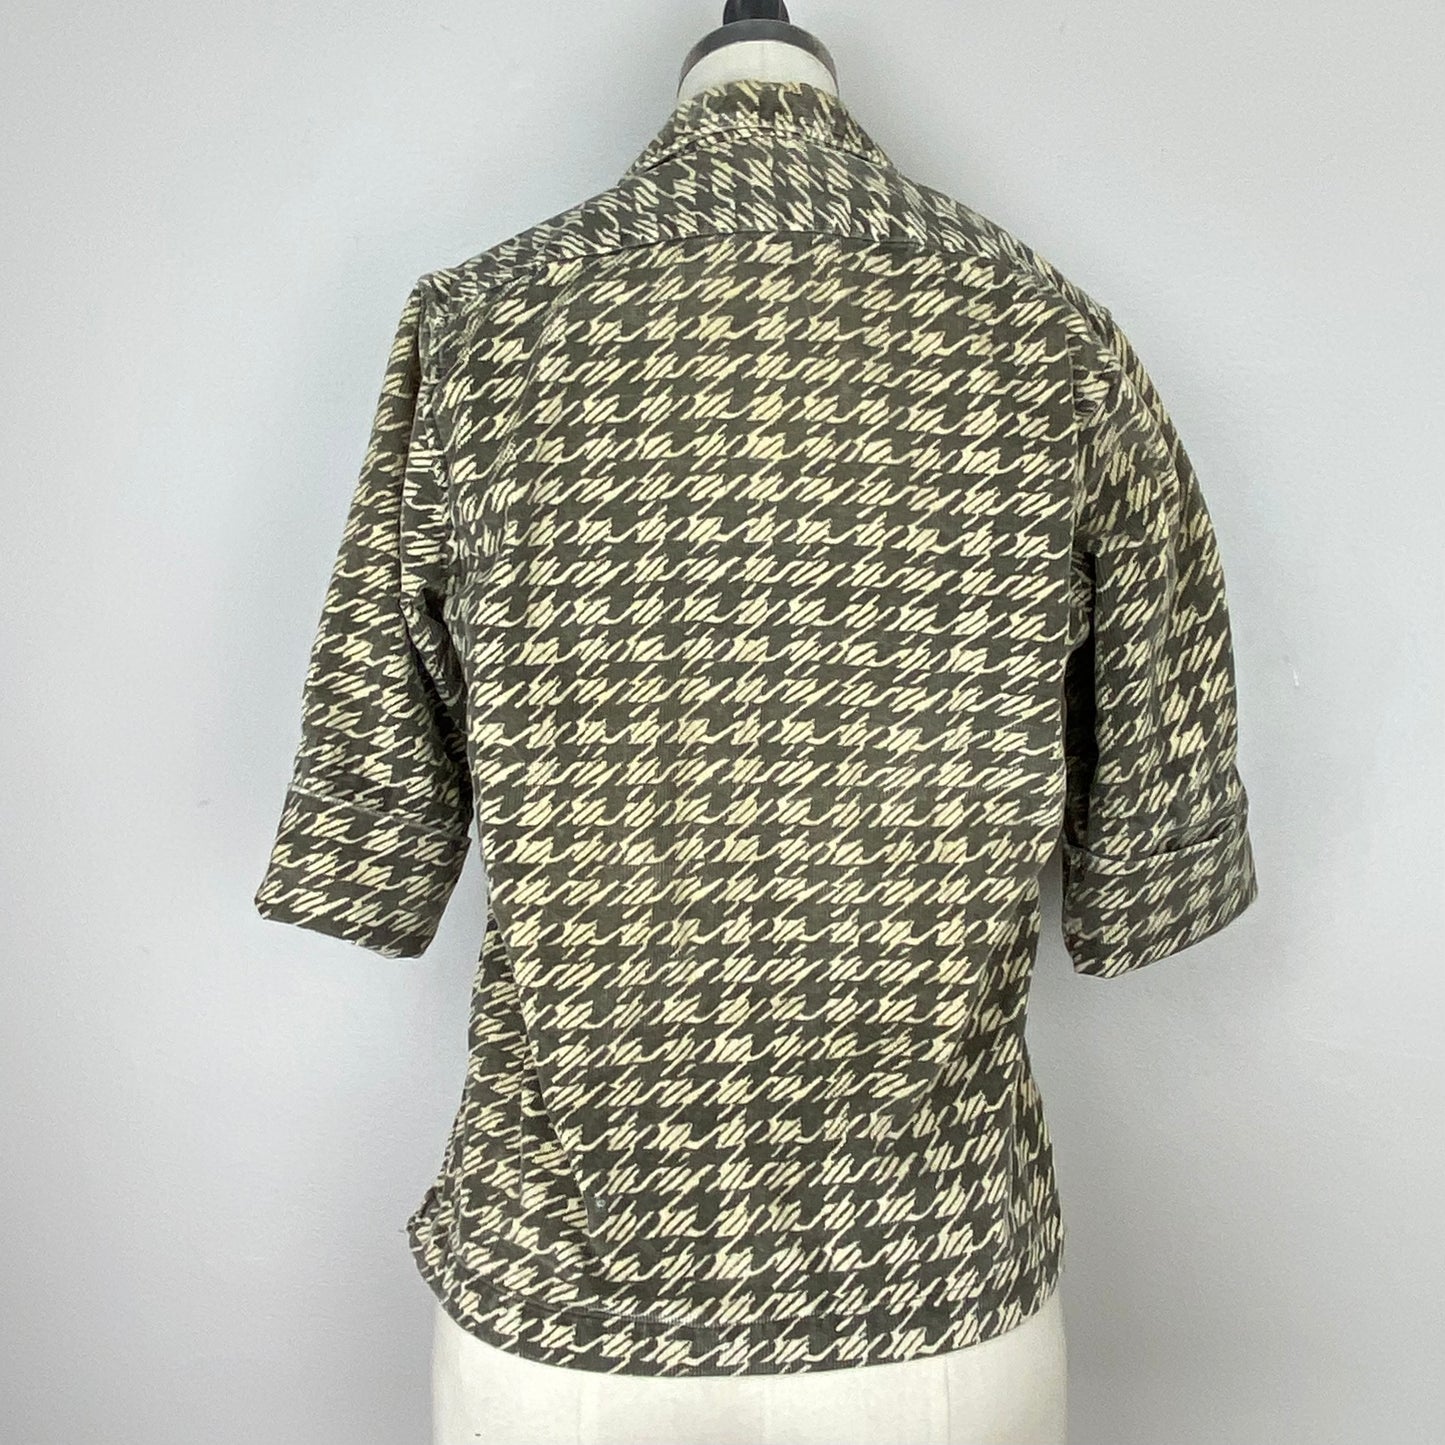 1950s Lady Hathaway Printed Corduroy Shirt, Size XS/S, Velour Cloth Houndstooth